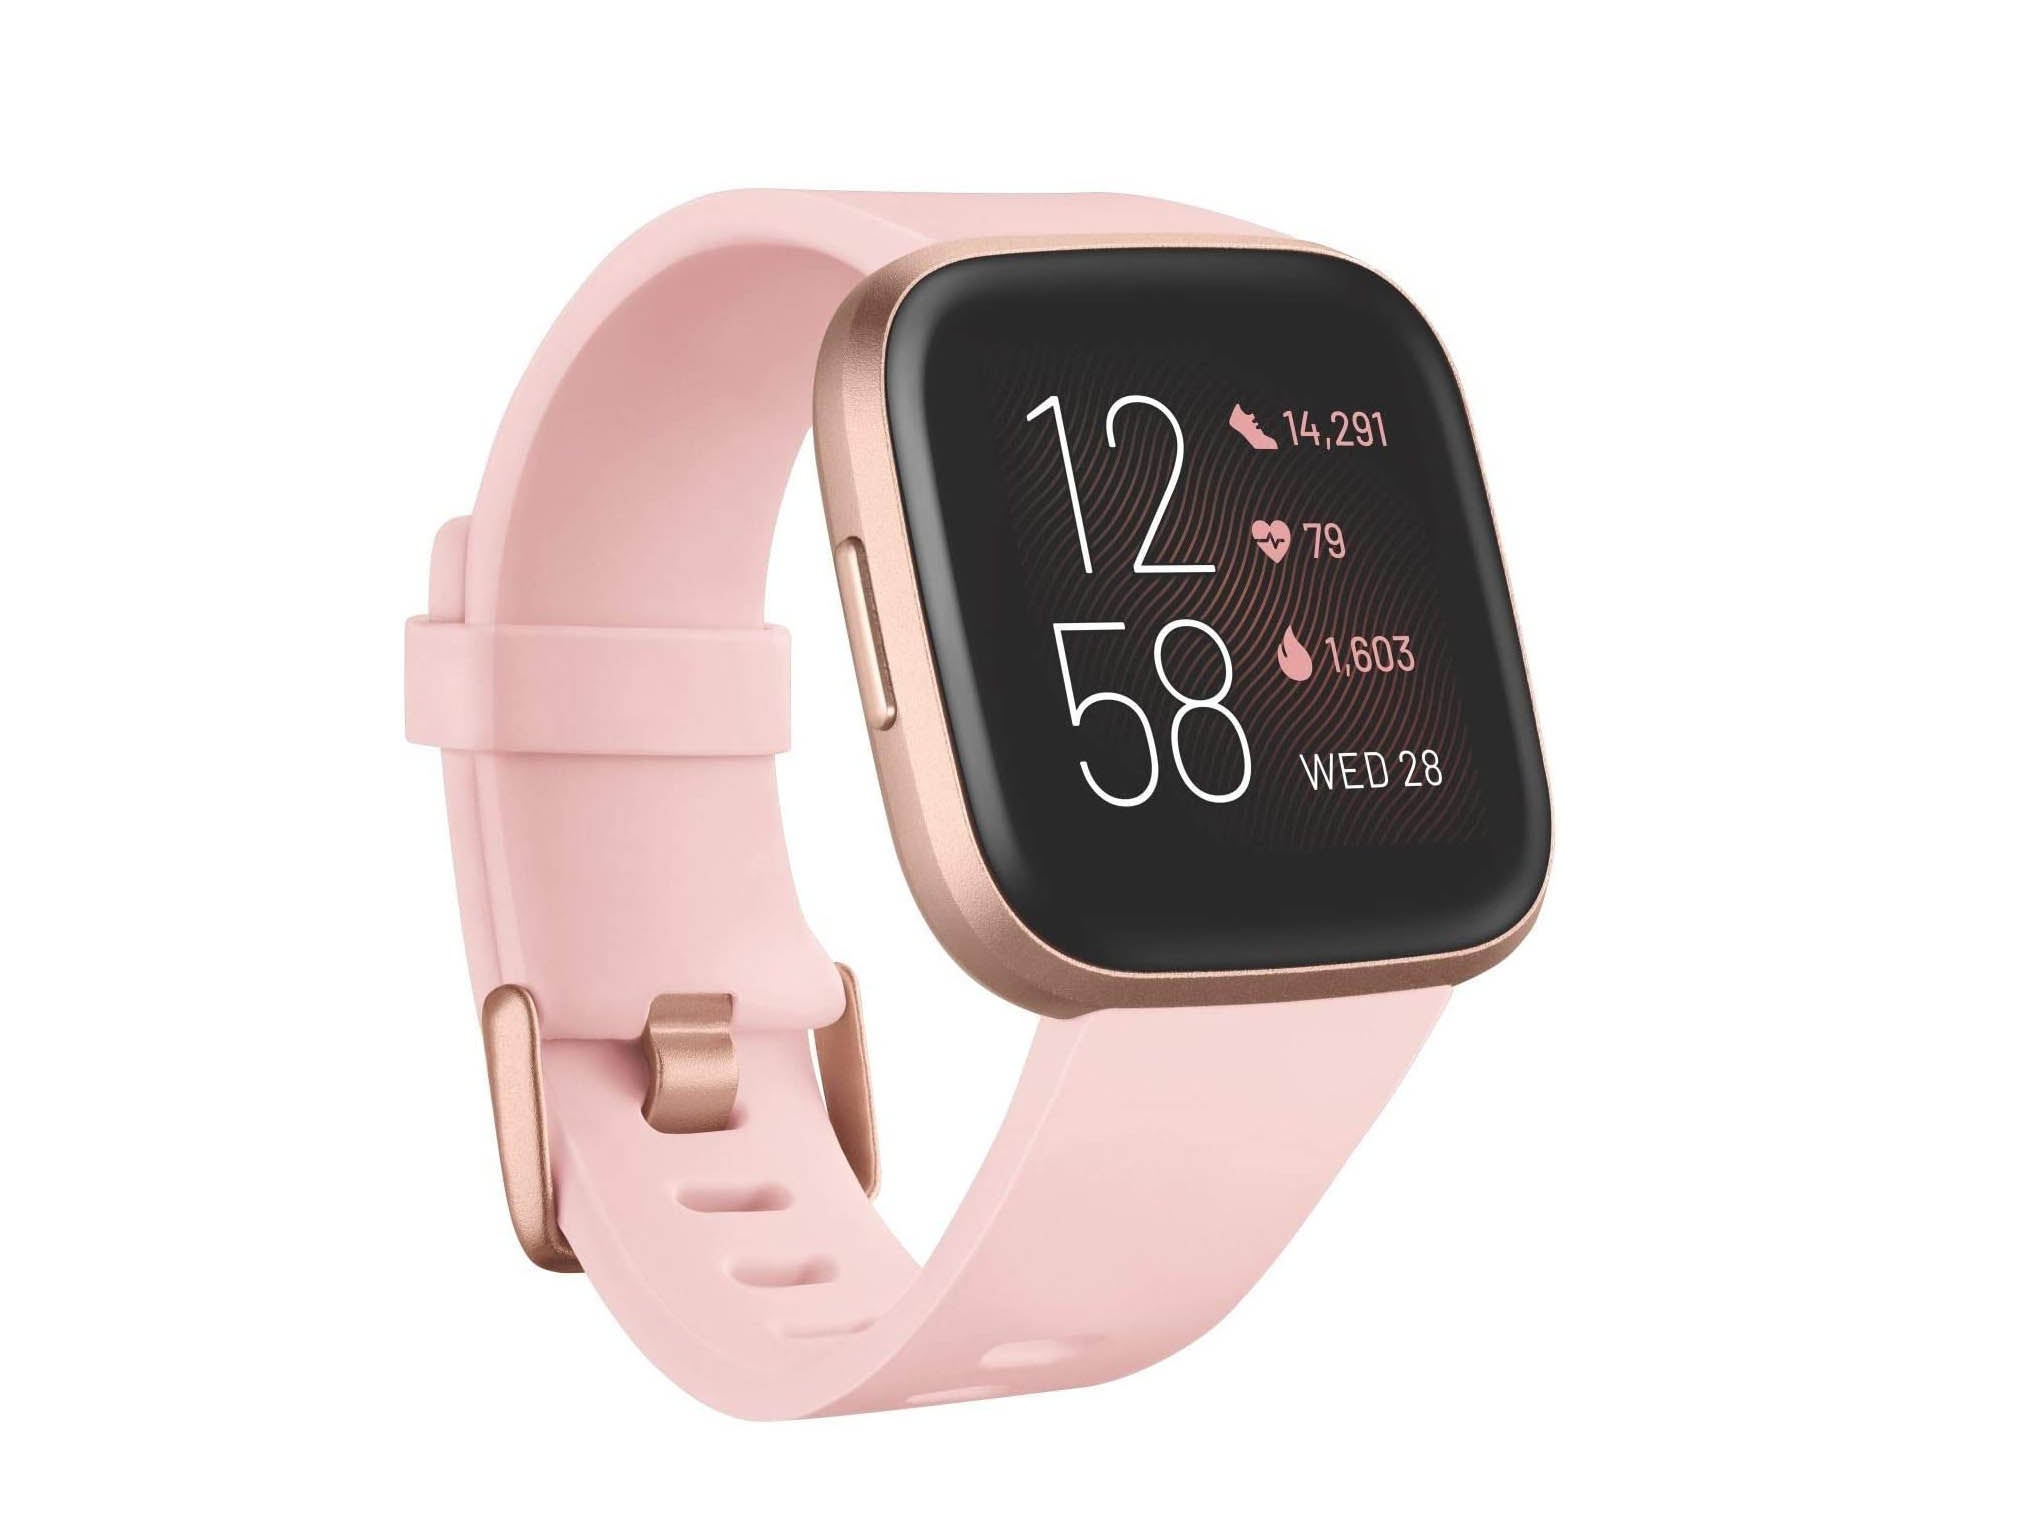 Fitbit Versa 2 Prime Day deal: Save £70 